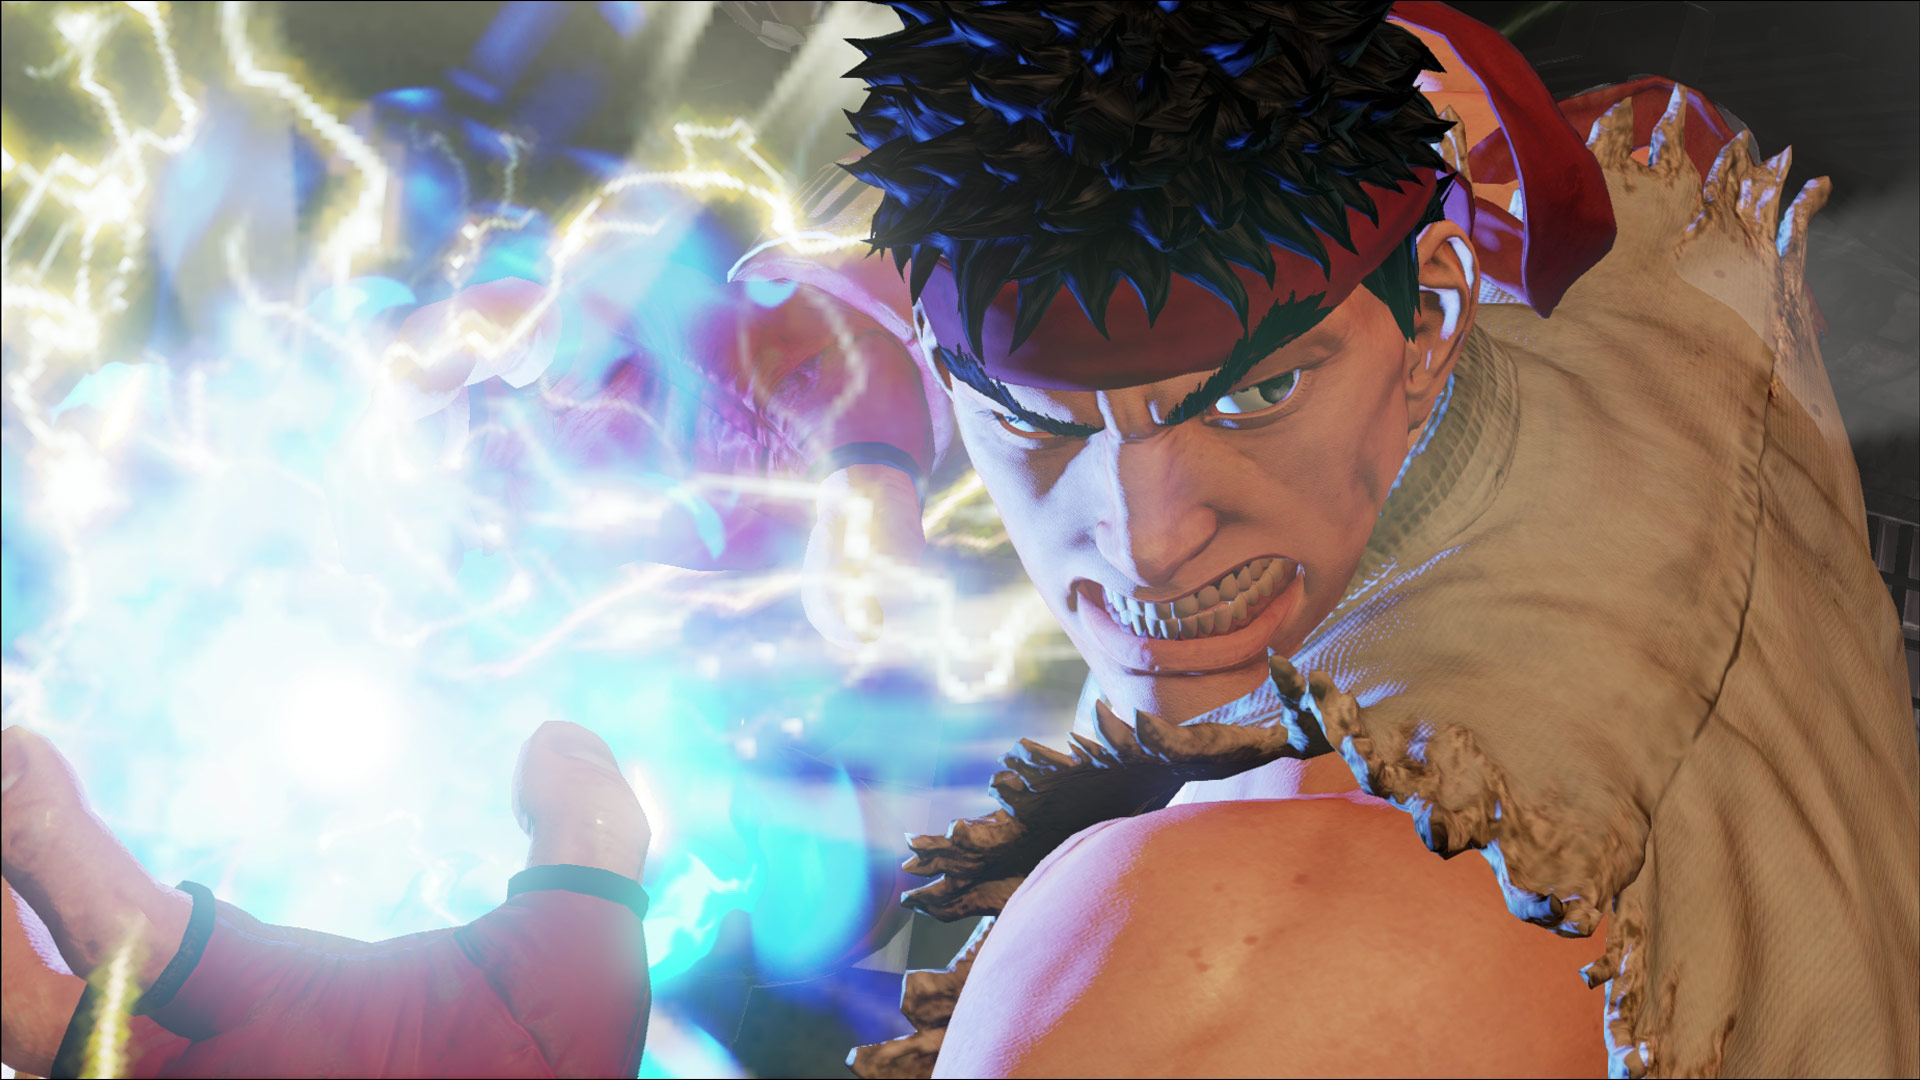 Why The Internet Freaked Out Over ‘Hot Ryu’